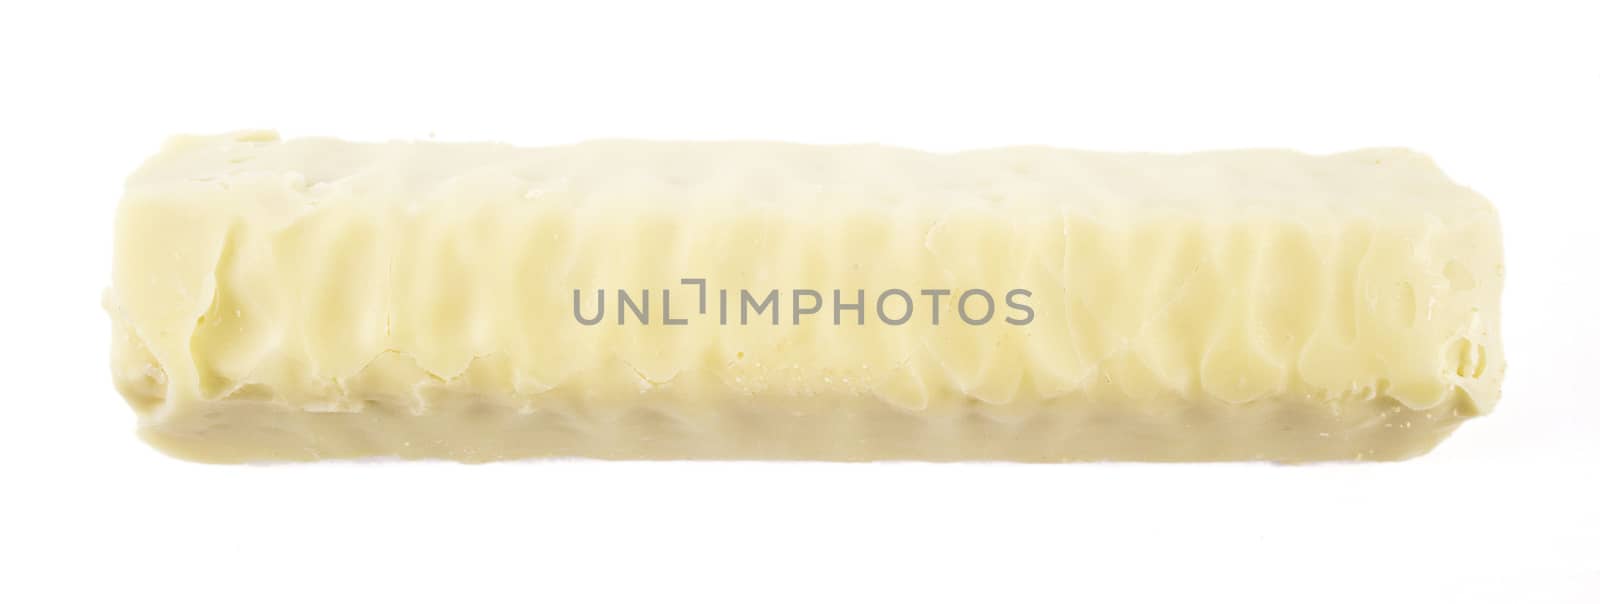 White chocolate bar with filling, on White background.